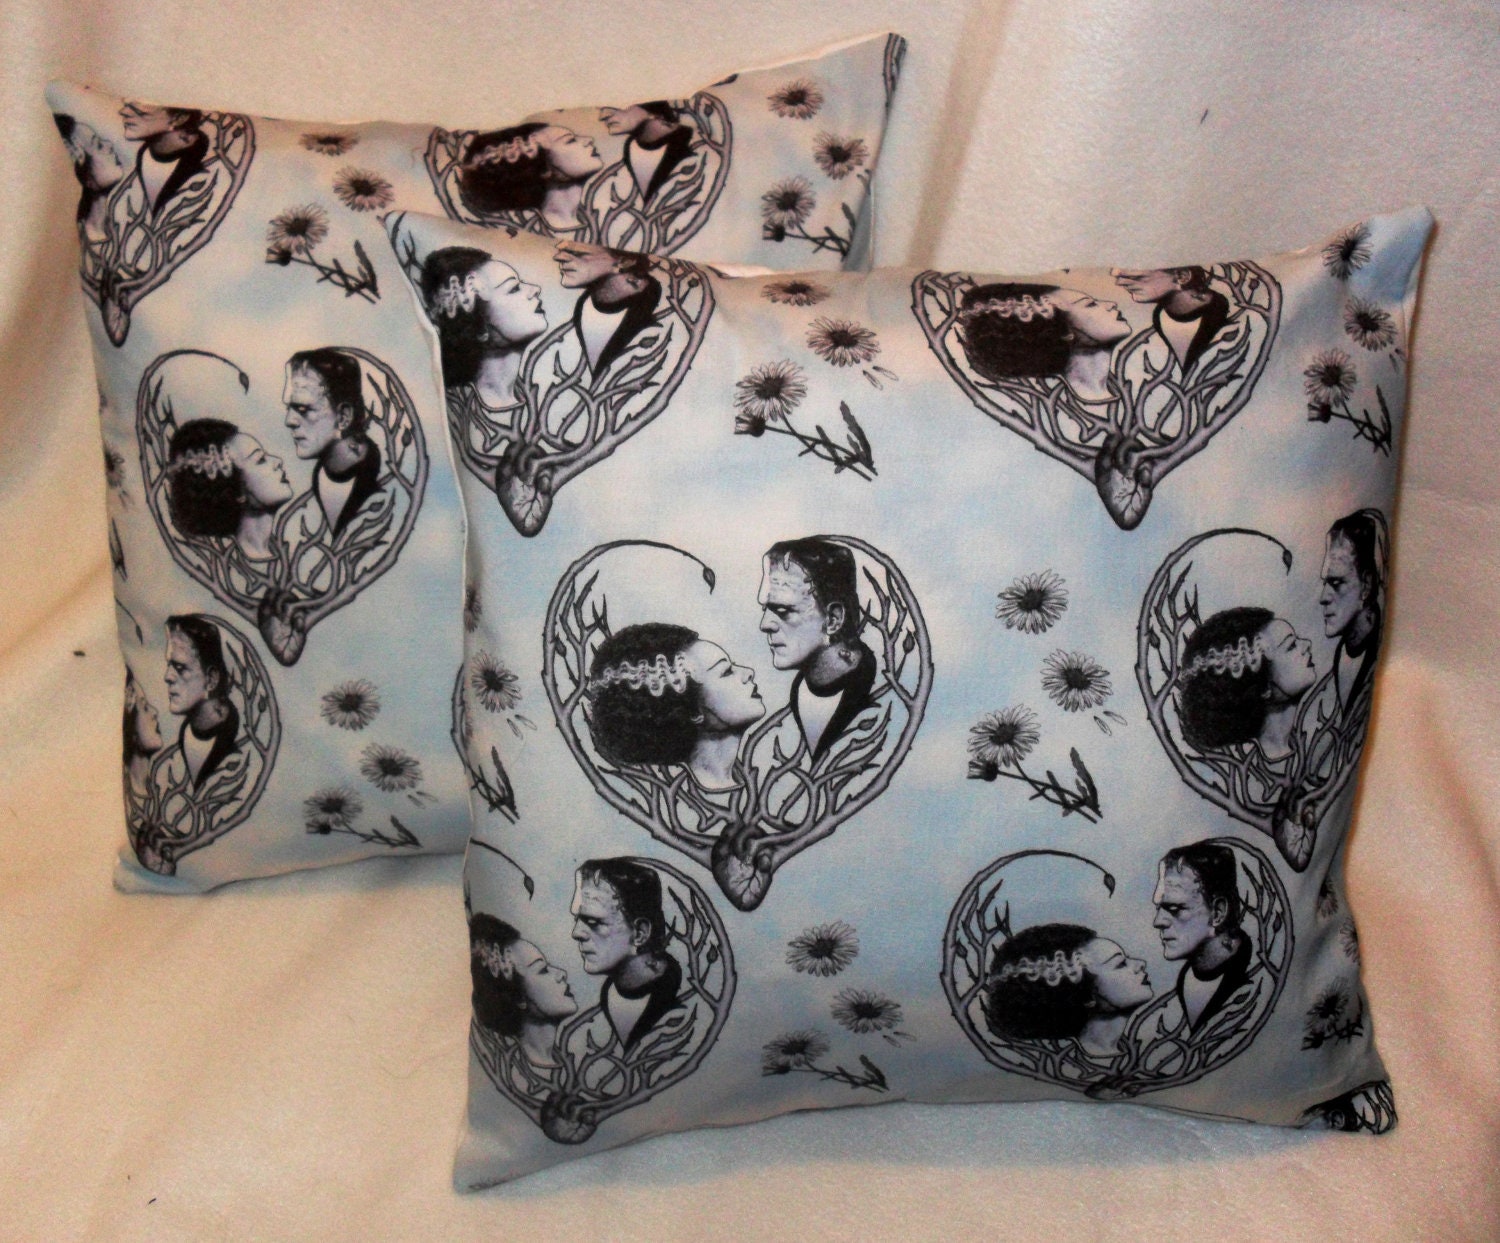 Frankenstein and Bride pillow covers